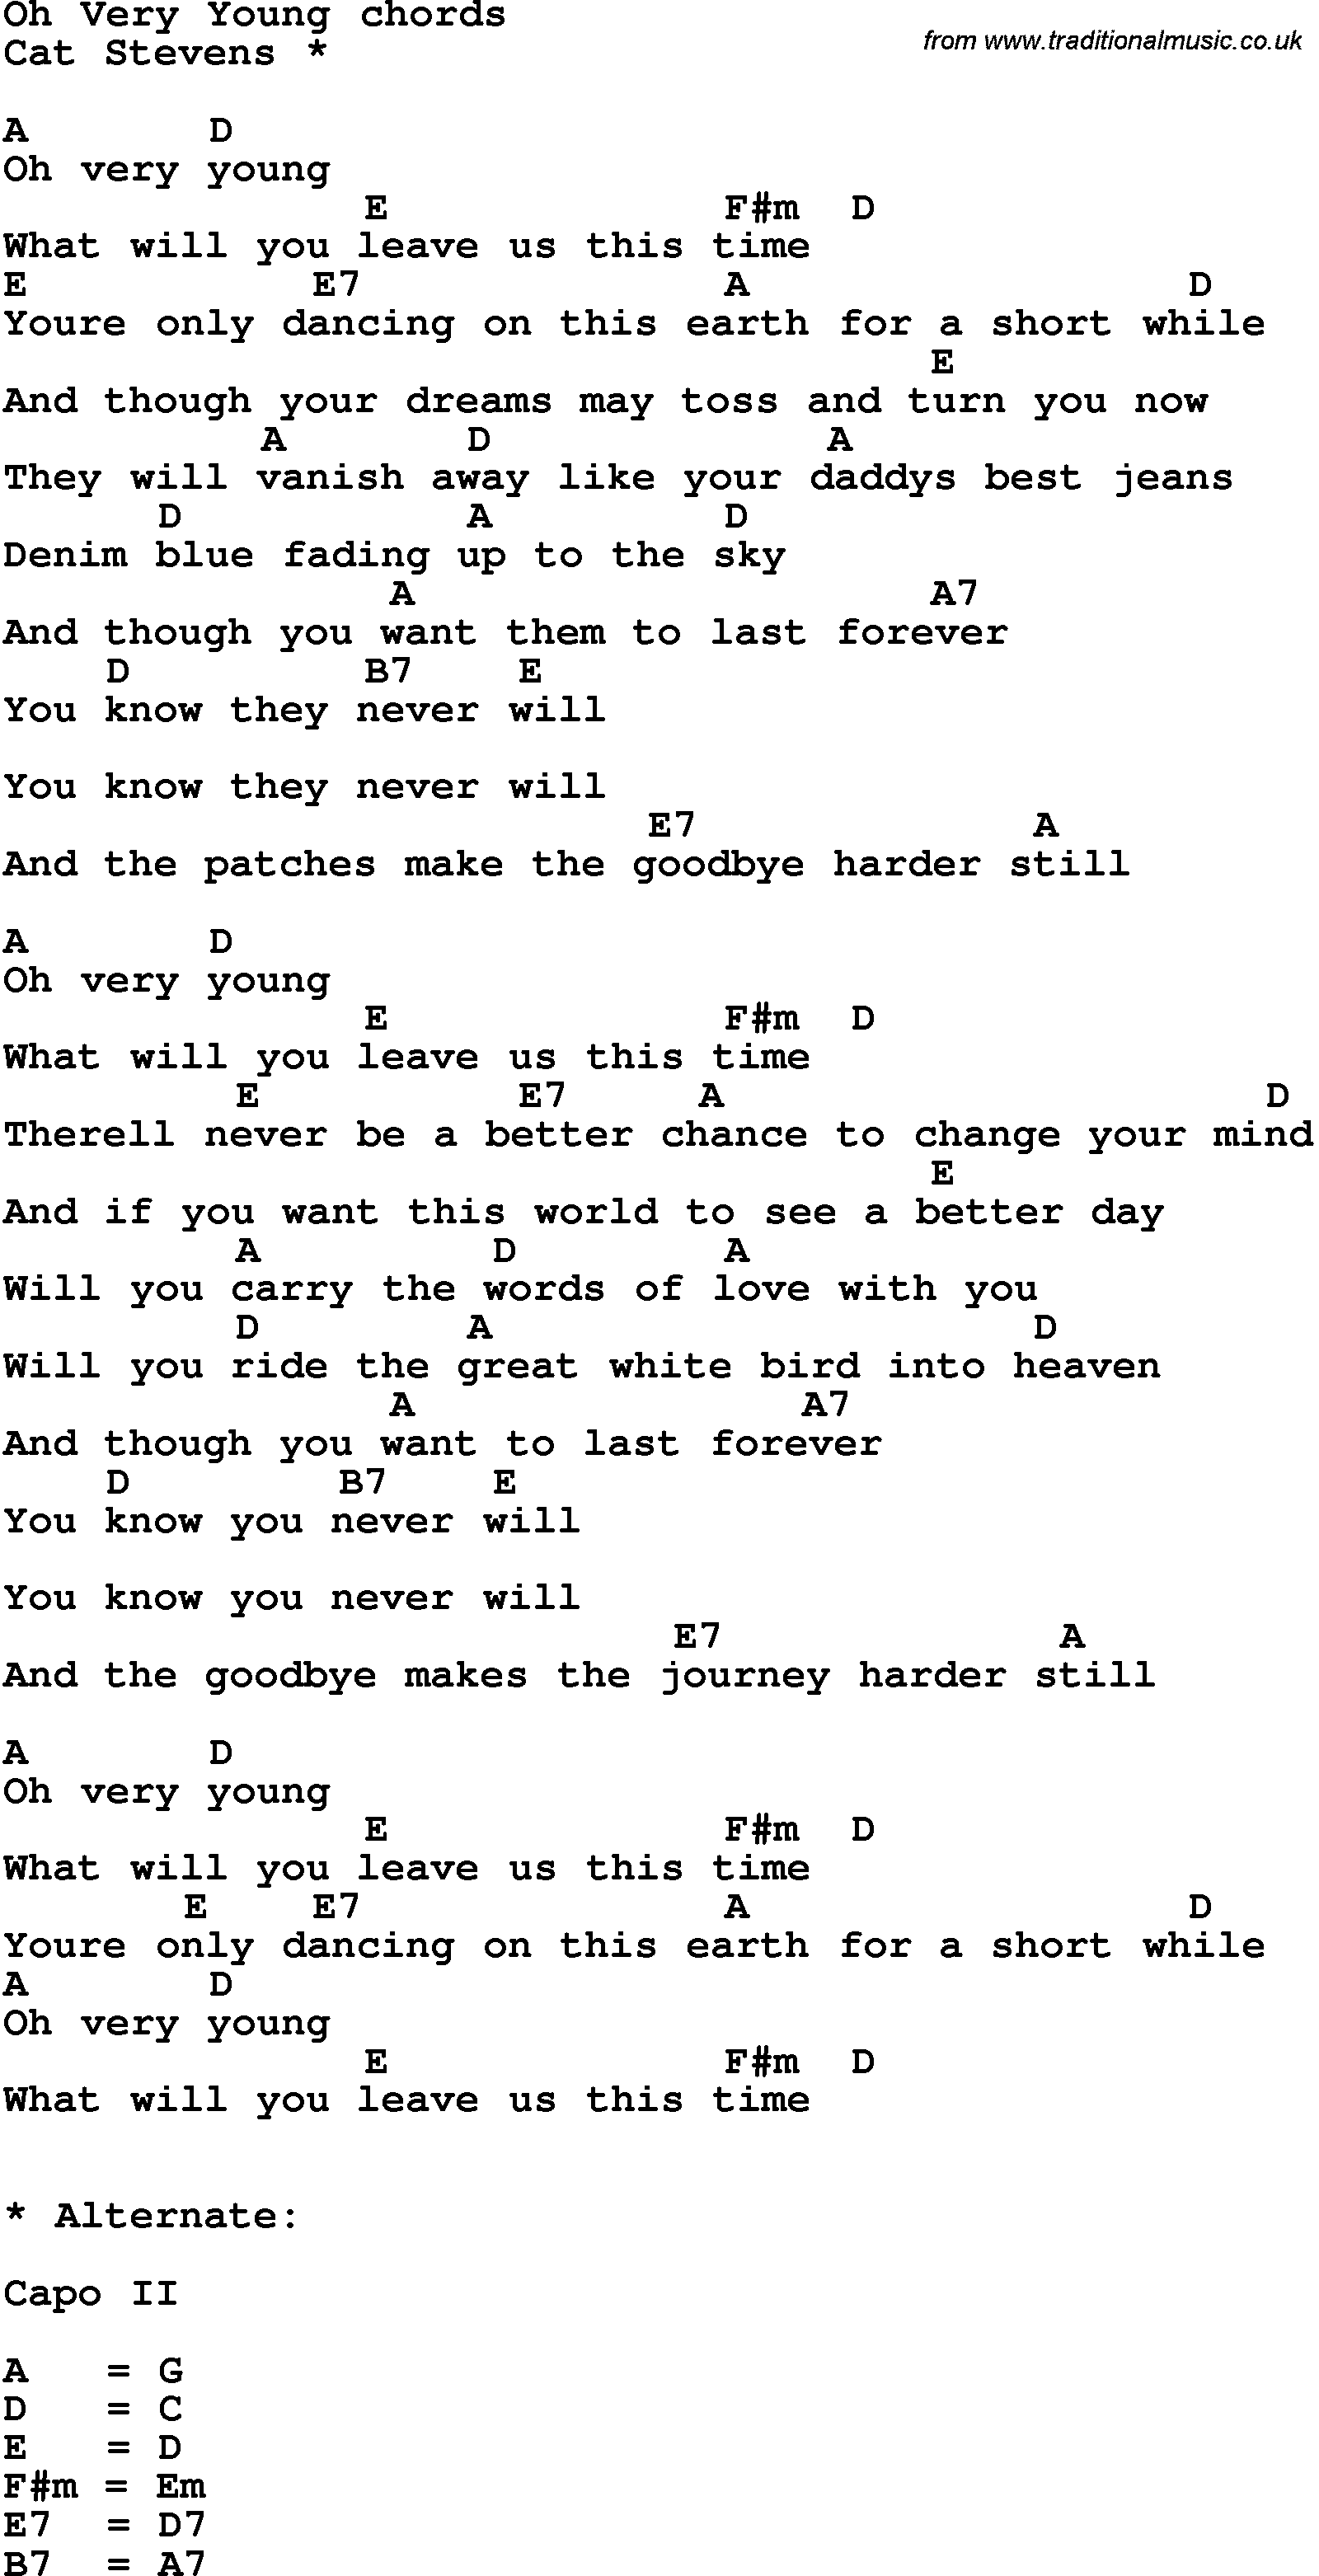 Song Lyrics with guitar chords for Oh Very Young